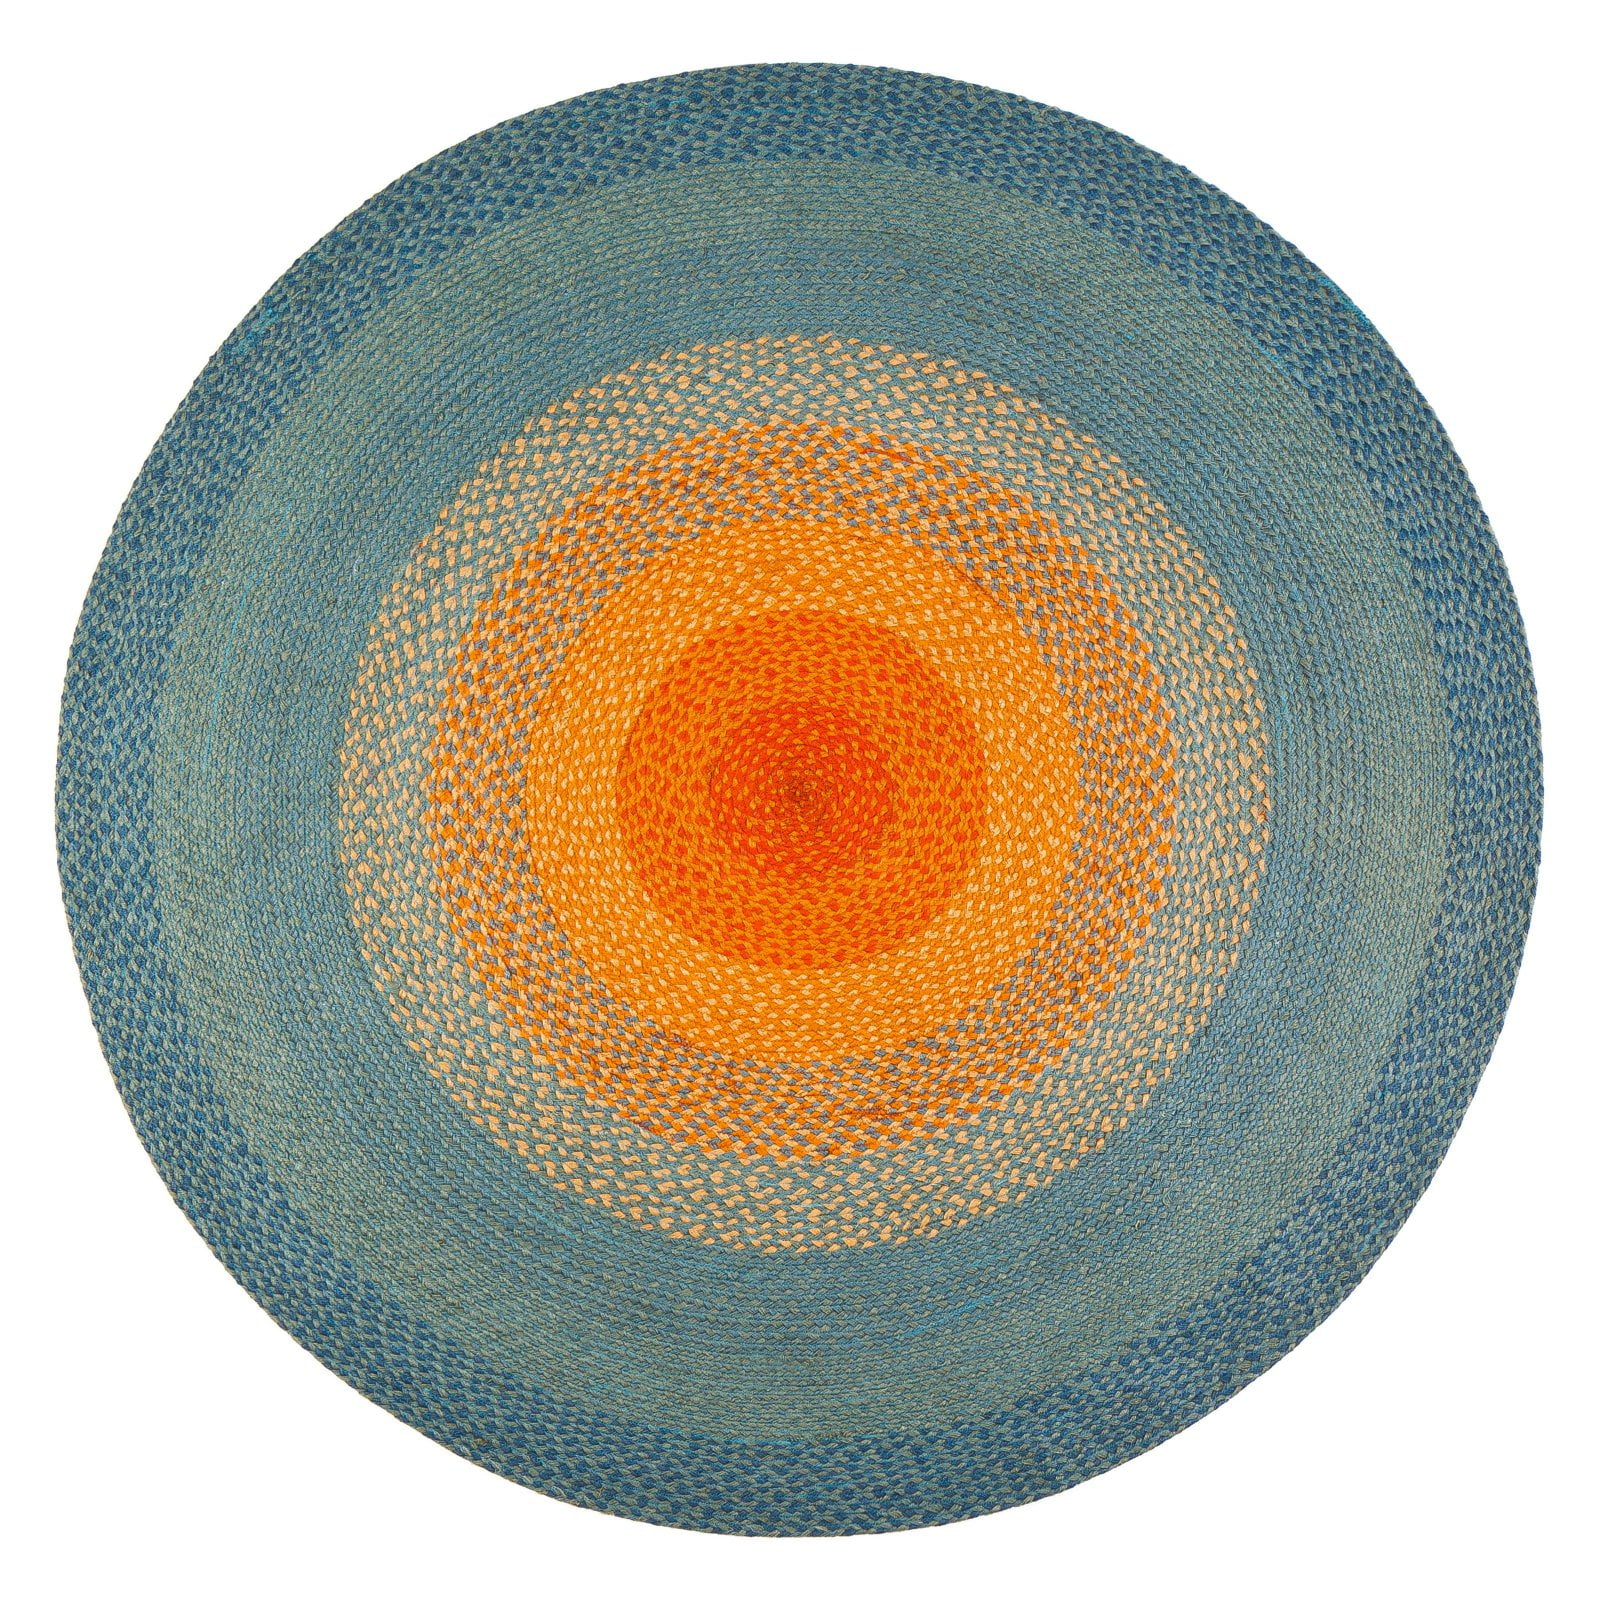 Picture of Anji Mountain AMB0424-060R 6 ft. Olwyn Braided Round Area Rug - Blue, Orange & Red